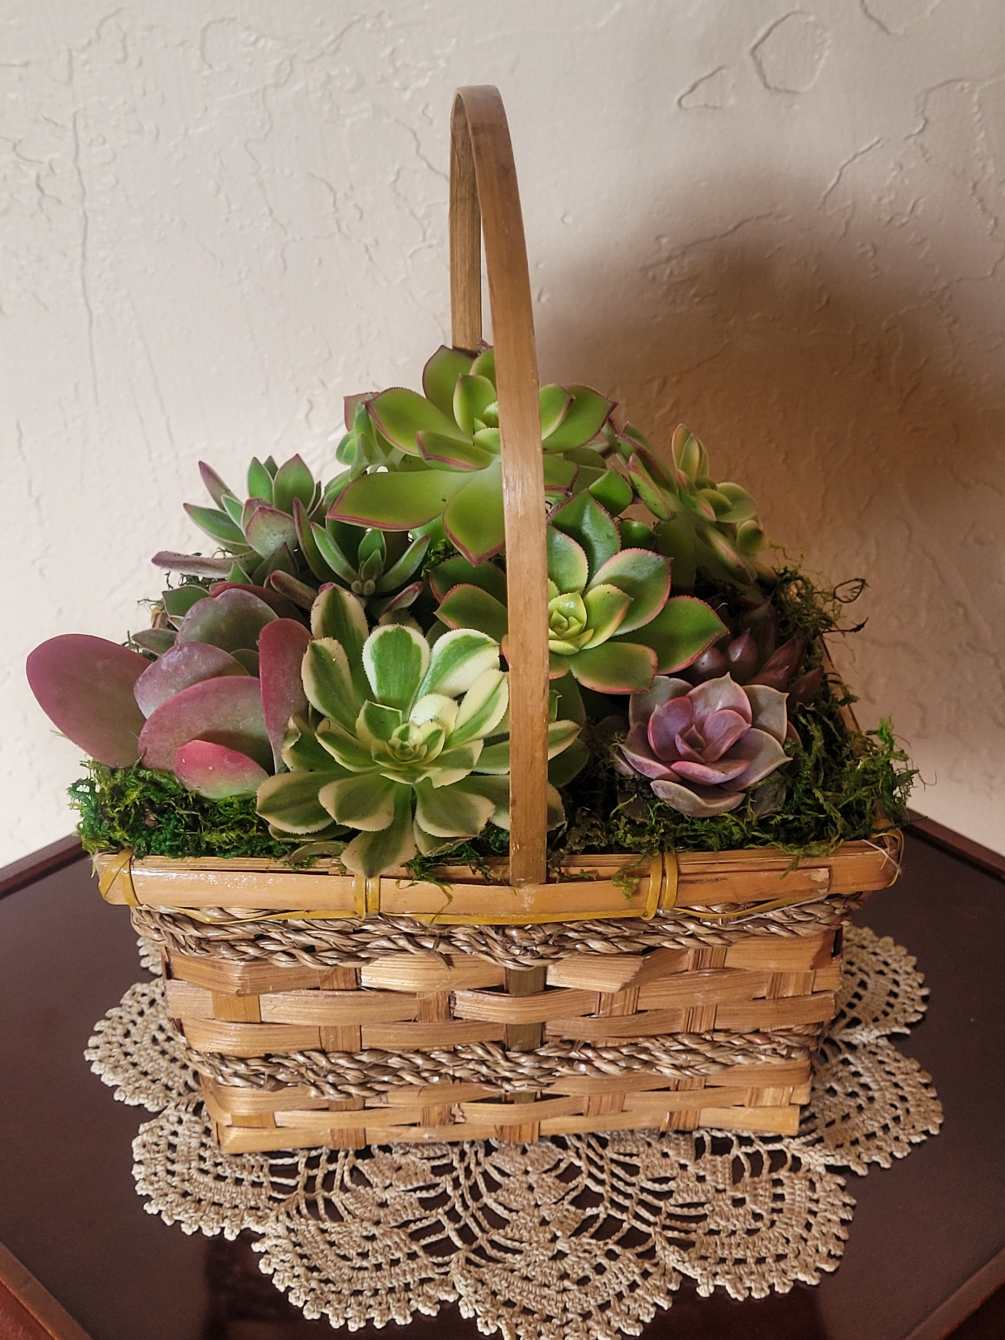 An assortment of succulents planted in a wicker basket. Ideal for anyone